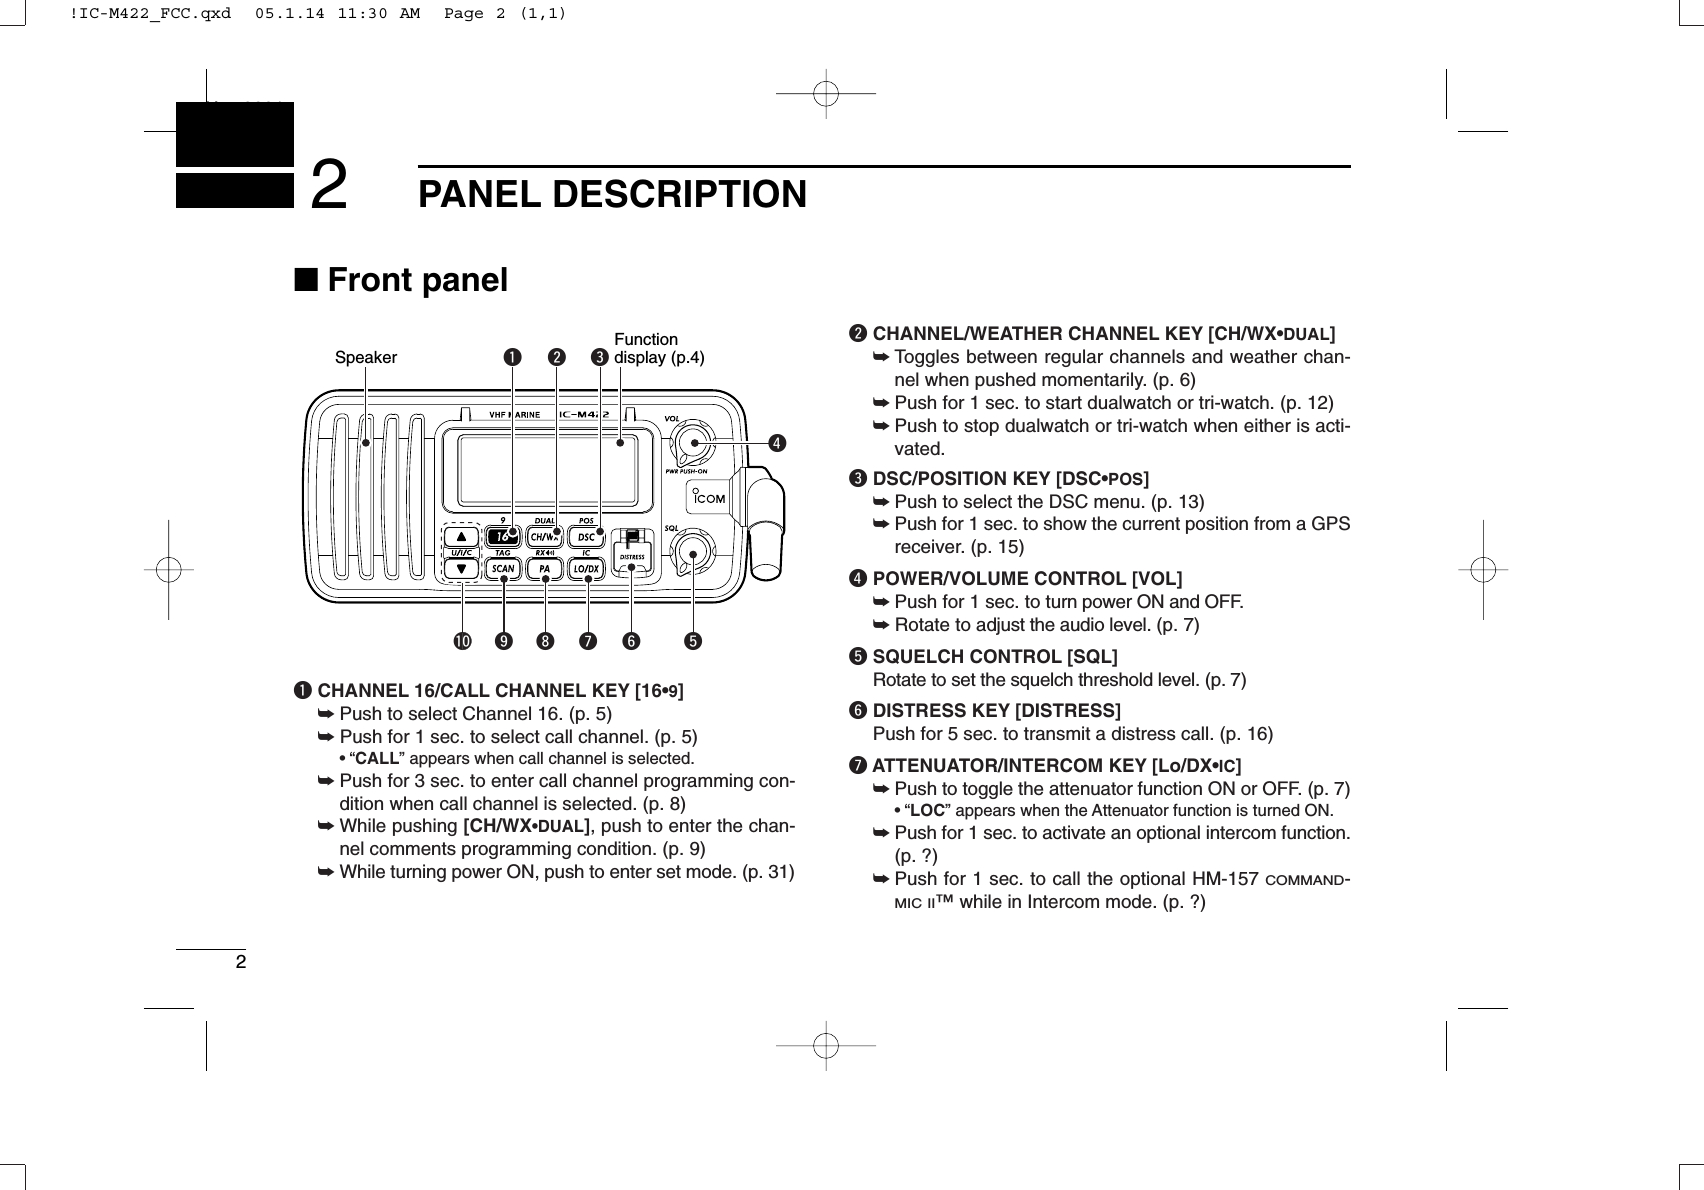 2PANEL DESCRIPTIONNew20012■Front panelqCHANNEL 16/CALL CHANNEL KEY [16•9]➥Push to select Channel 16. (p. 5)➥Push for 1 sec. to select call channel. (p. 5)•“CALL” appears when call channel is selected.➥Push for 3 sec. to enter call channel programming con-dition when call channel is selected. (p. 8)➥While pushing [CH/WX•DUAL], push to enter the chan-nel comments programming condition. (p. 9)➥While turning power ON, push to enter set mode. (p. 31)wCHANNEL/WEATHER CHANNEL KEY [CH/WX•DUAL]➥Toggles between regular channels and weather chan-nel when pushed momentarily. (p. 6)➥Push for 1 sec. to start dualwatch or tri-watch. (p. 12)➥Push to stop dualwatch or tri-watch when either is acti-vated.eDSC/POSITION KEY [DSC•POS]➥Push to select the DSC menu. (p. 13)➥Push for 1 sec. to show the current position from a GPSreceiver. (p. 15)rPOWER/VOLUME CONTROL [VOL]➥Push for 1 sec. to turn power ON and OFF.➥Rotate to adjust the audio level. (p. 7)tSQUELCH CONTROL [SQL]Rotate to set the squelch threshold level. (p. 7)yDISTRESS KEY [DISTRESS]Push for 5 sec. to transmit a distress call. (p. 16)uATTENUATOR/INTERCOM KEY [Lo/DX•IC]➥Push to toggle the attenuator function ON or OFF. (p. 7)•“LOC” appears when the Attenuator function is turned ON.➥Push for 1 sec. to activate an optional intercom function.(p. ?)➥Push for 1 sec. to call the optional HM-157 COMMAND-MIC II™ while in Intercom mode. (p. ?)qwerSpeakerFunctiondisplay (p.4)!0 oiuy t!IC-M422_FCC.qxd  05.1.14 11:30 AM  Page 2 (1,1)